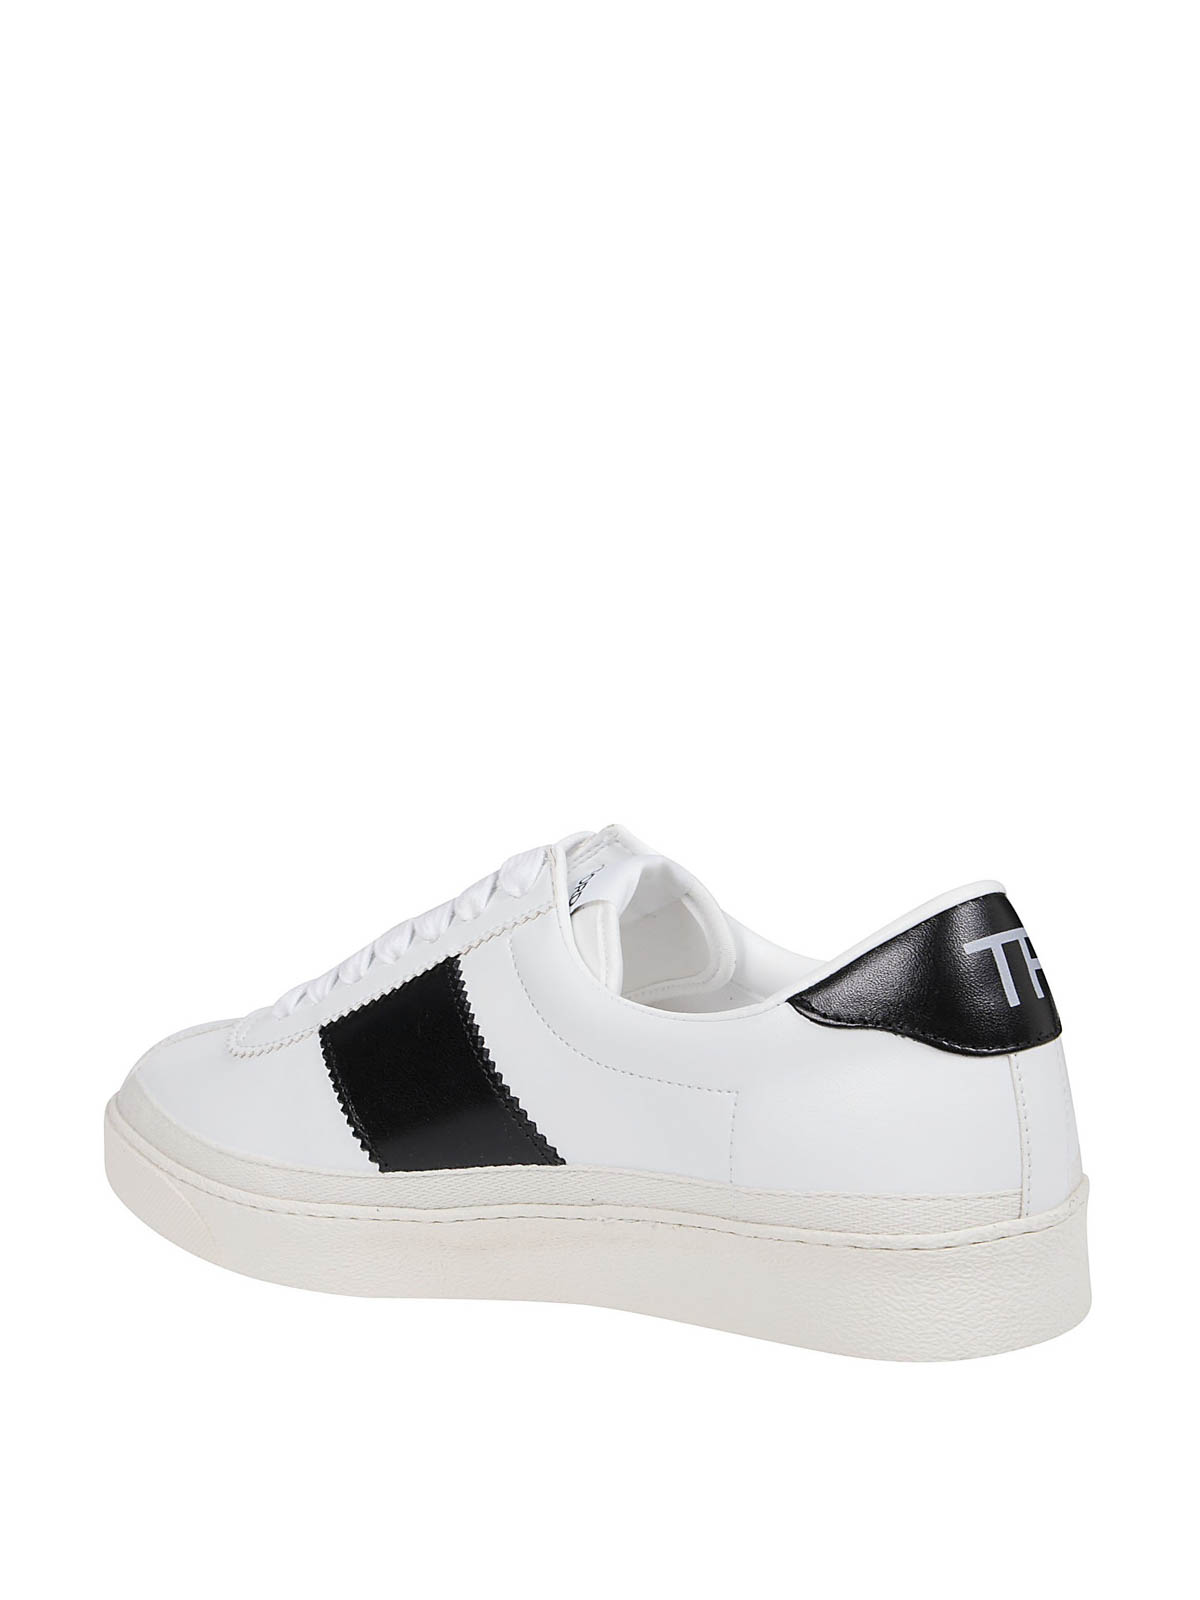 tom ford trainers